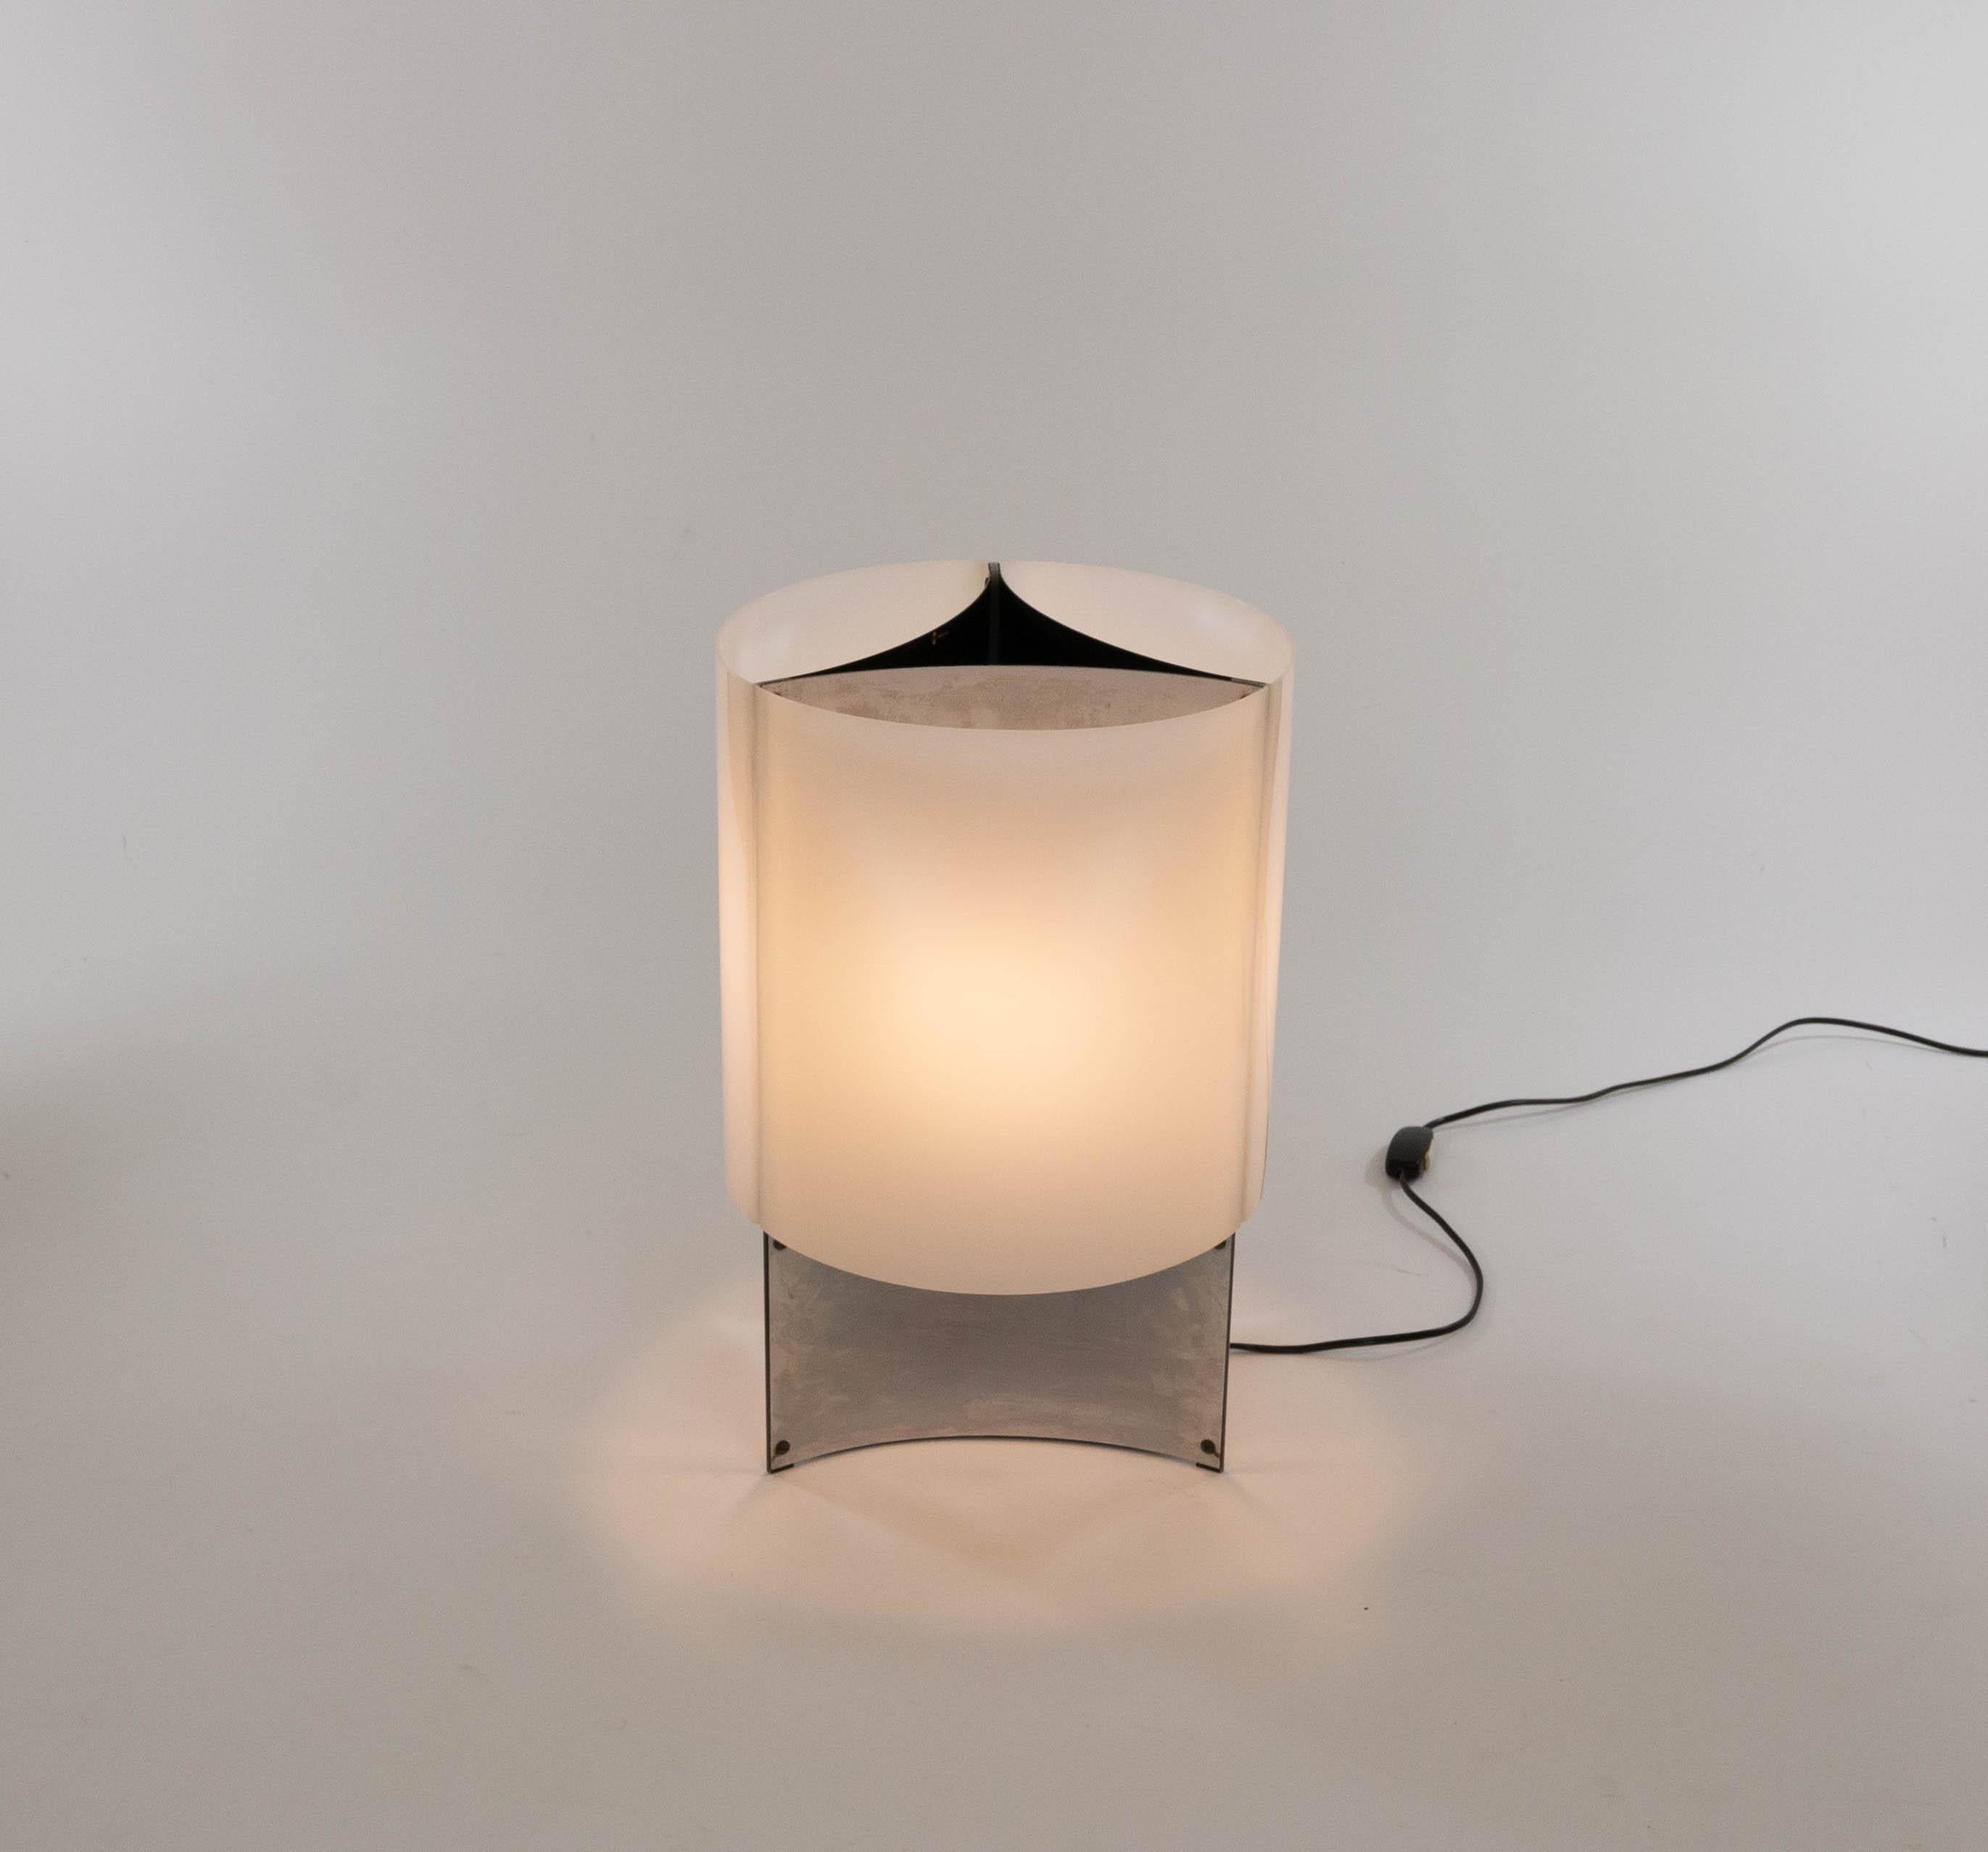 Mid-Century Modern Table Lamp Model No. 526 by Massimo Vignelli for Arteluce, 1965 For Sale